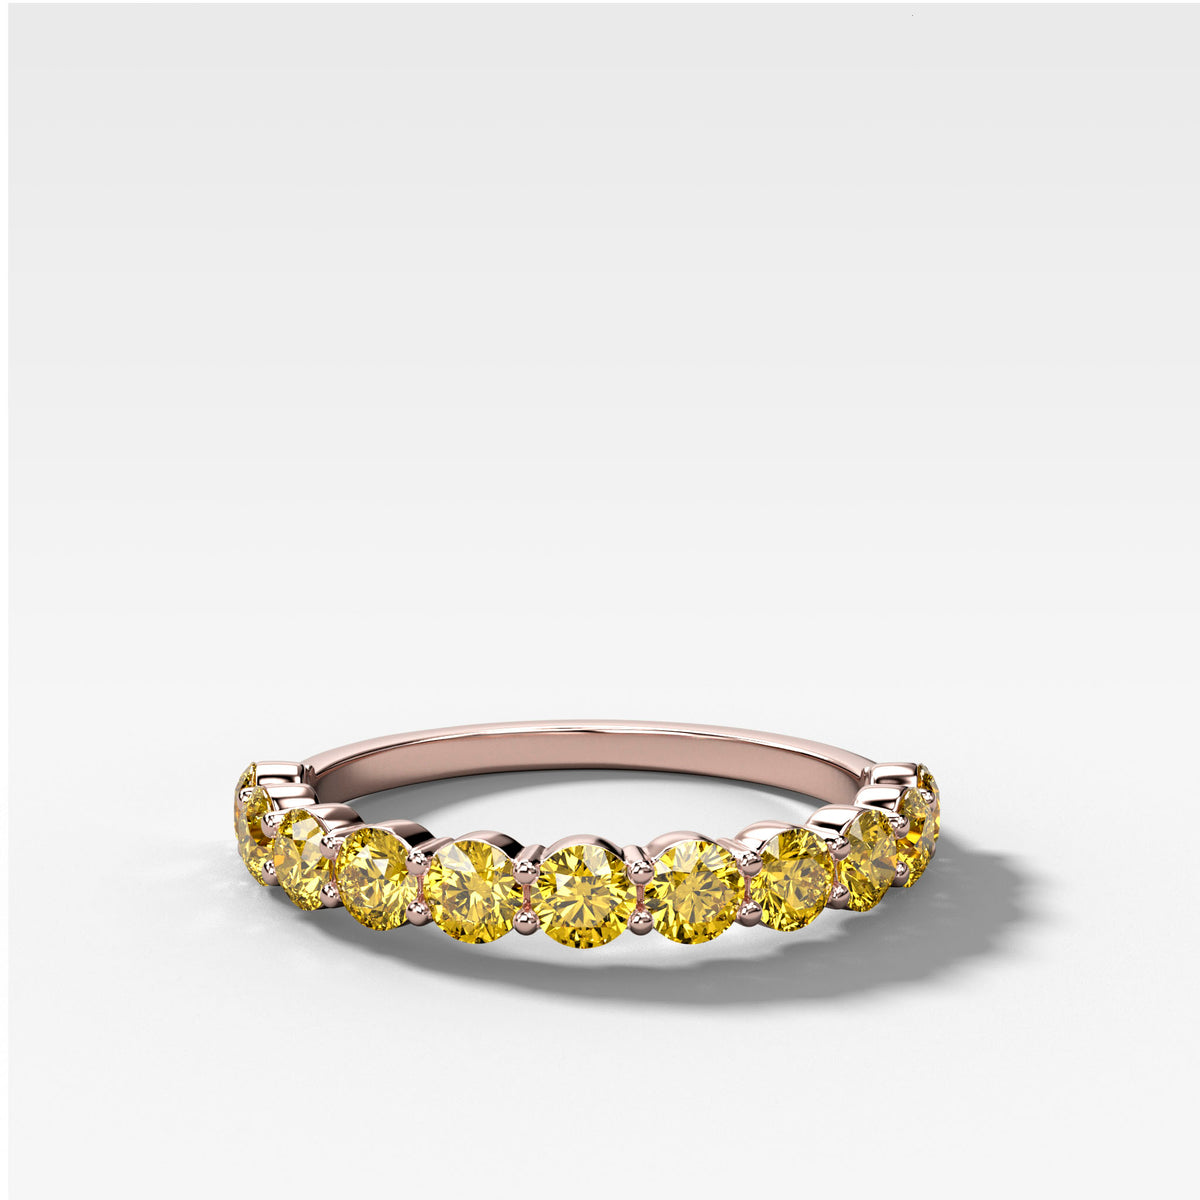 Shared Prong Wedding Band With Canary Yellow Round Diamonds